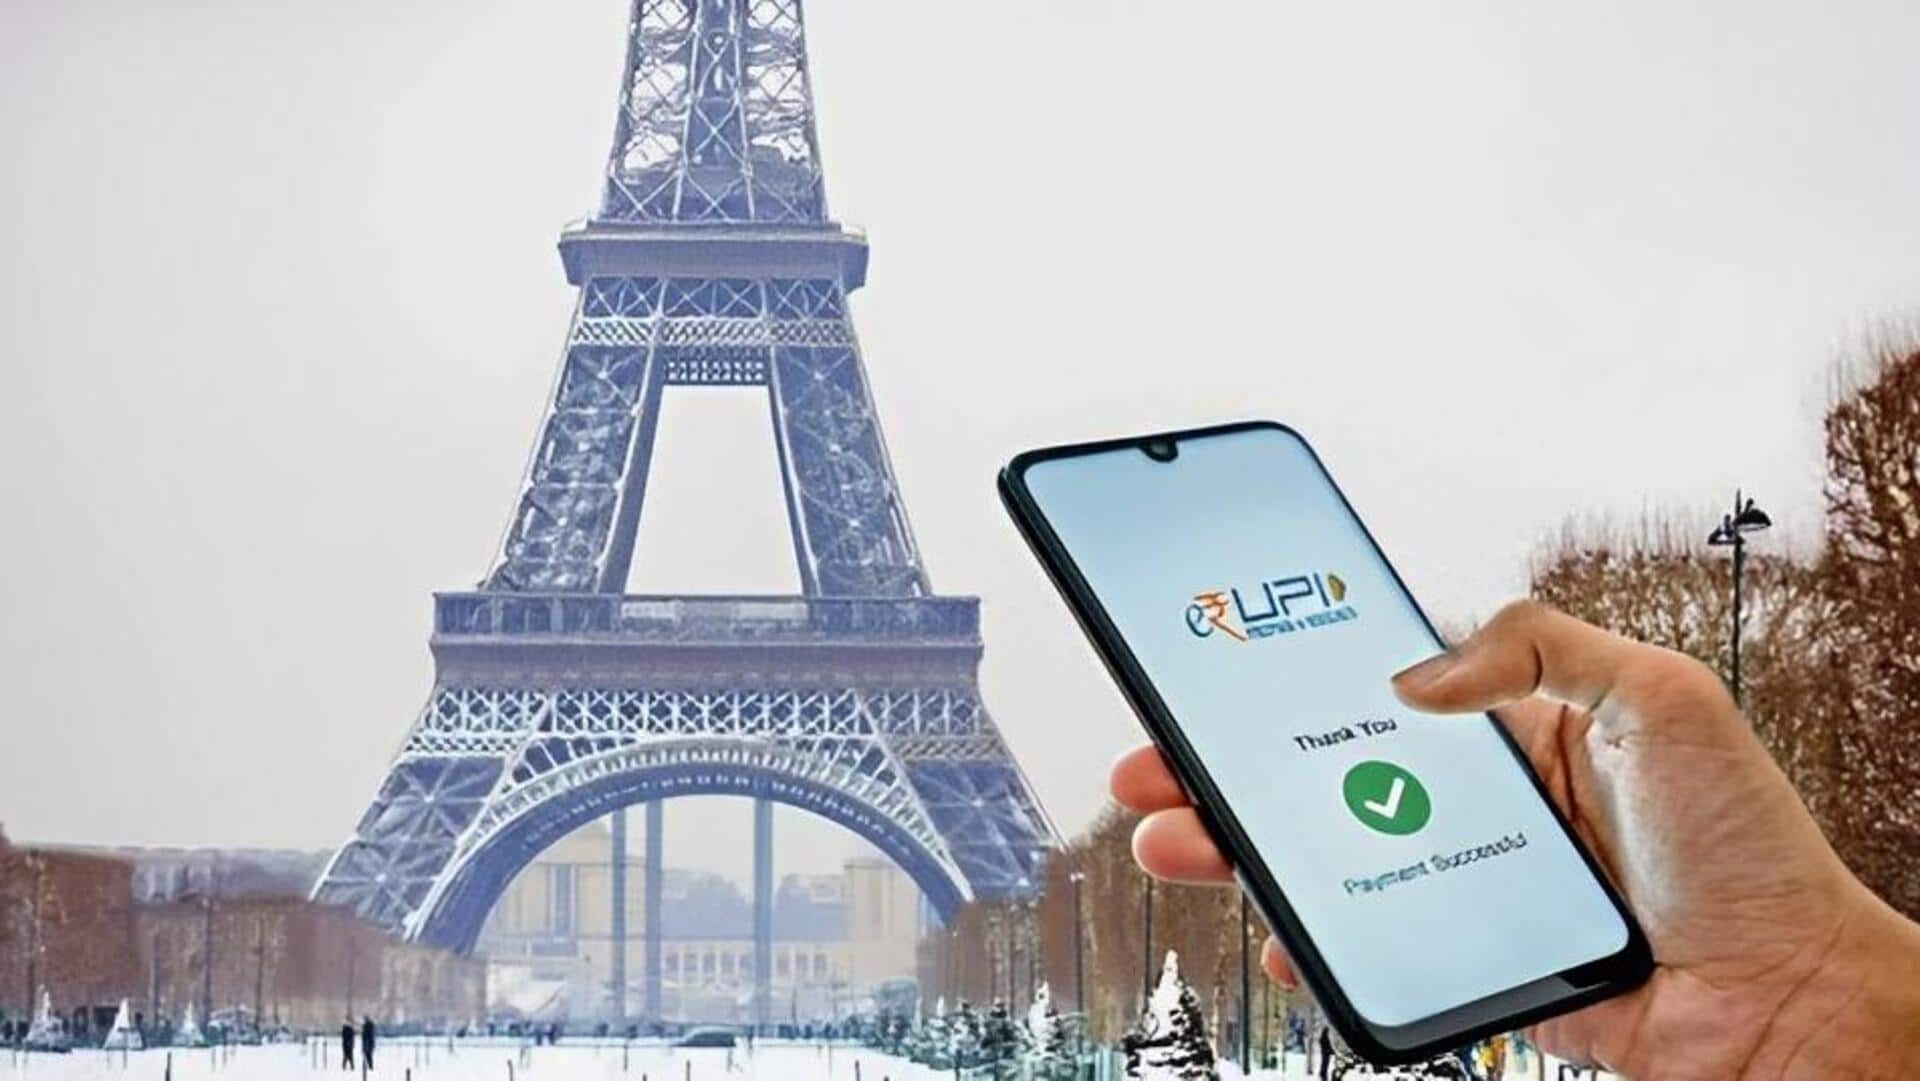 You can now buy Eiffel Tower tickets using UPI